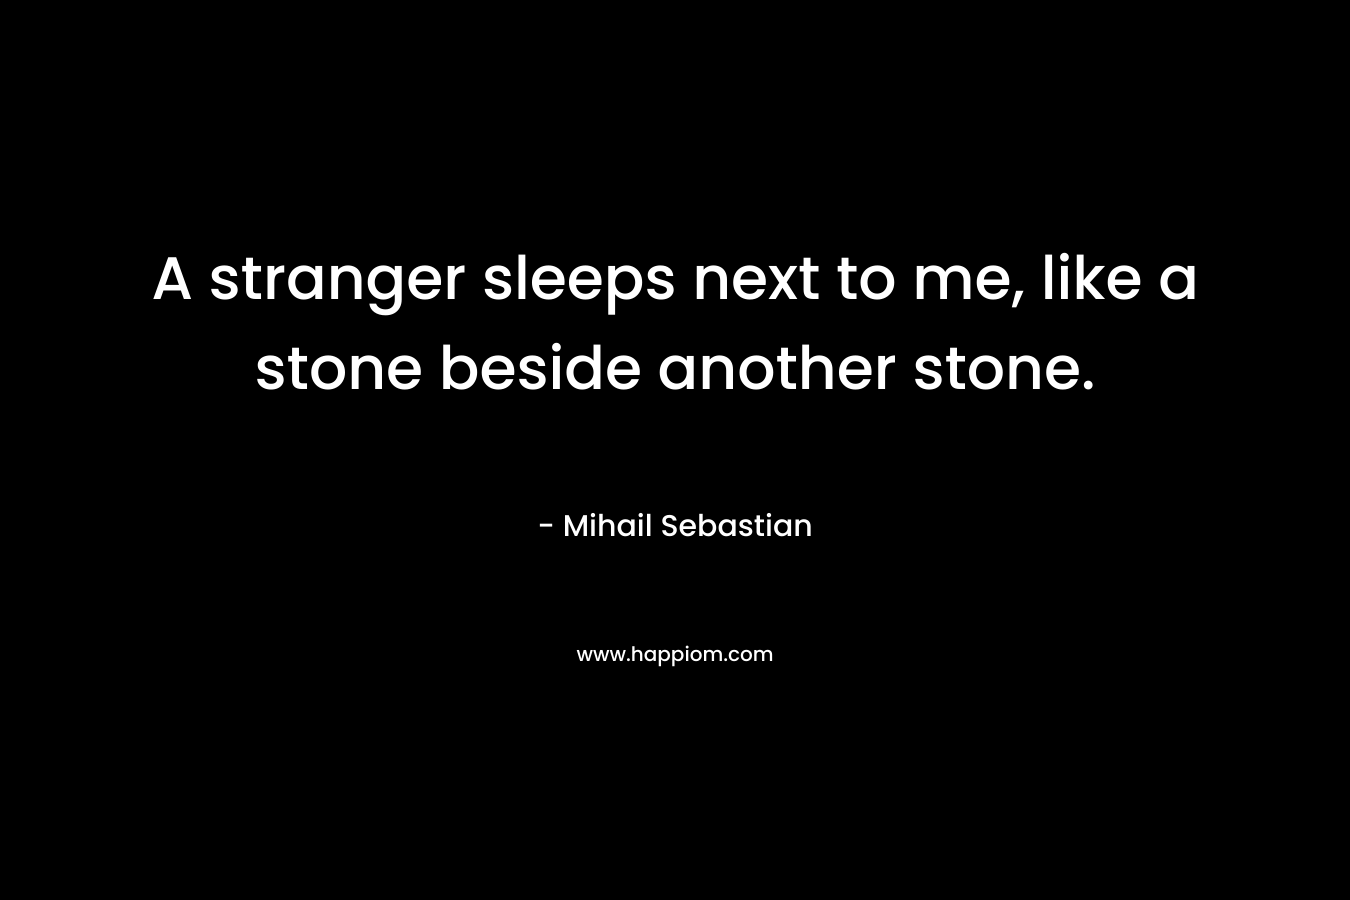 A stranger sleeps next to me, like a stone beside another stone.